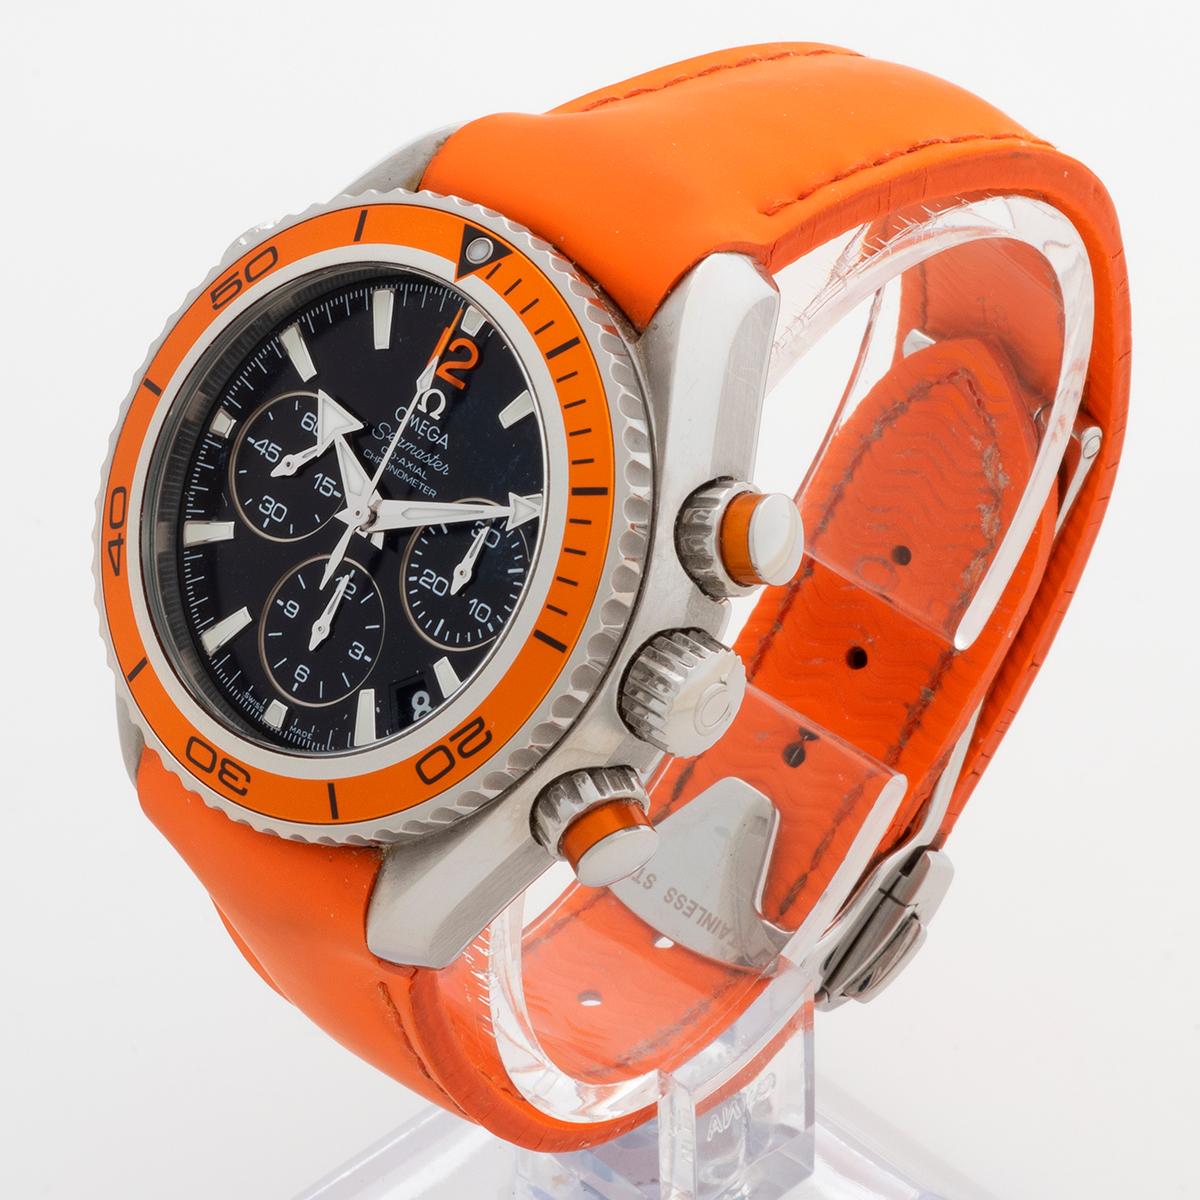 Women's or Men's Extremley Rare Reference, Omega Seamaster Planet Ocean Chronograph, Box & Papers